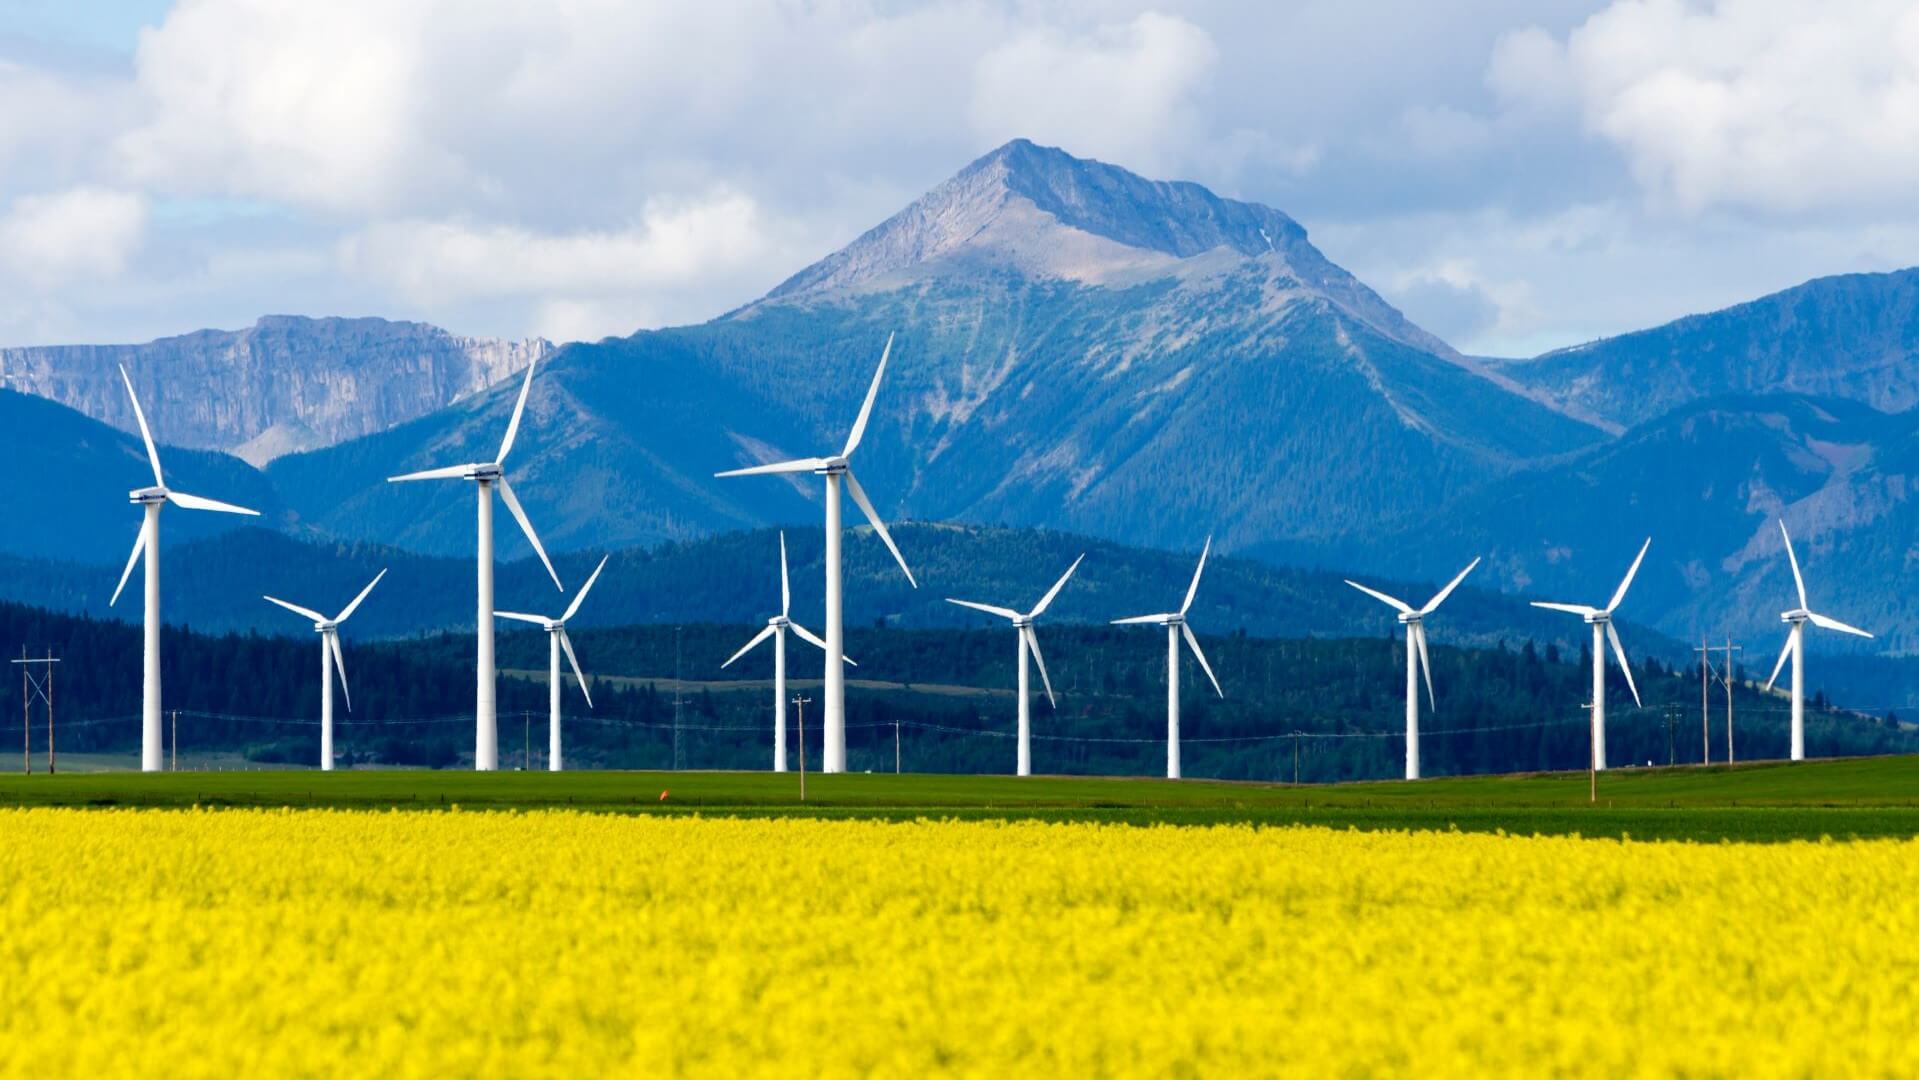 Wind farm in Alberta with mountains in background, fields in foreground